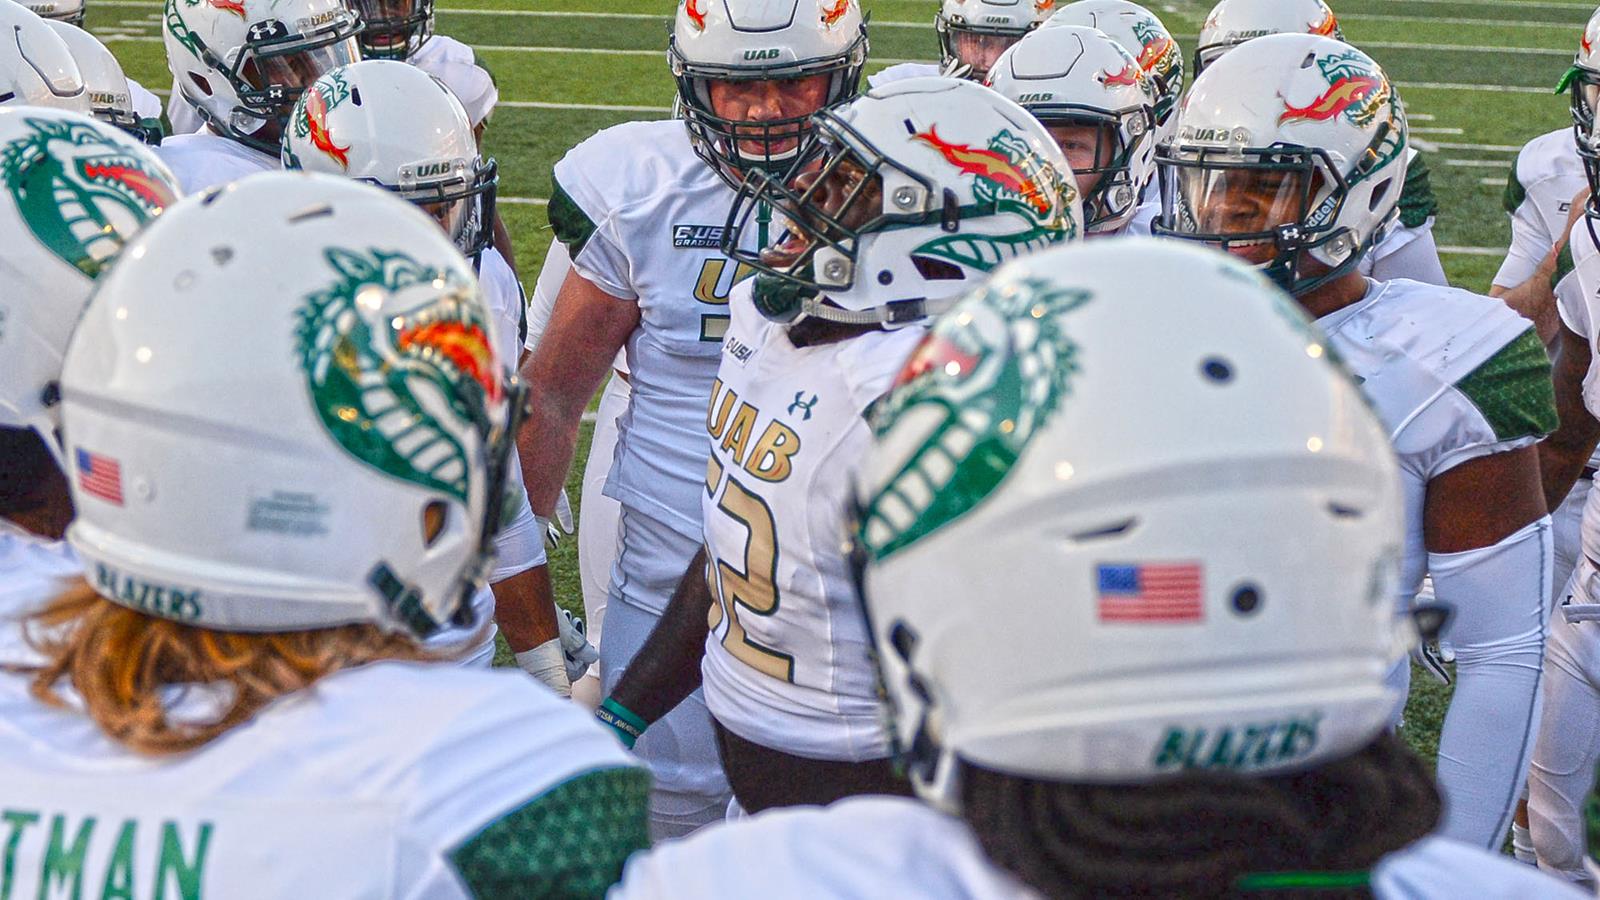 Uab Hosts Rice Looking To Gain Bowl Eligibility University Of